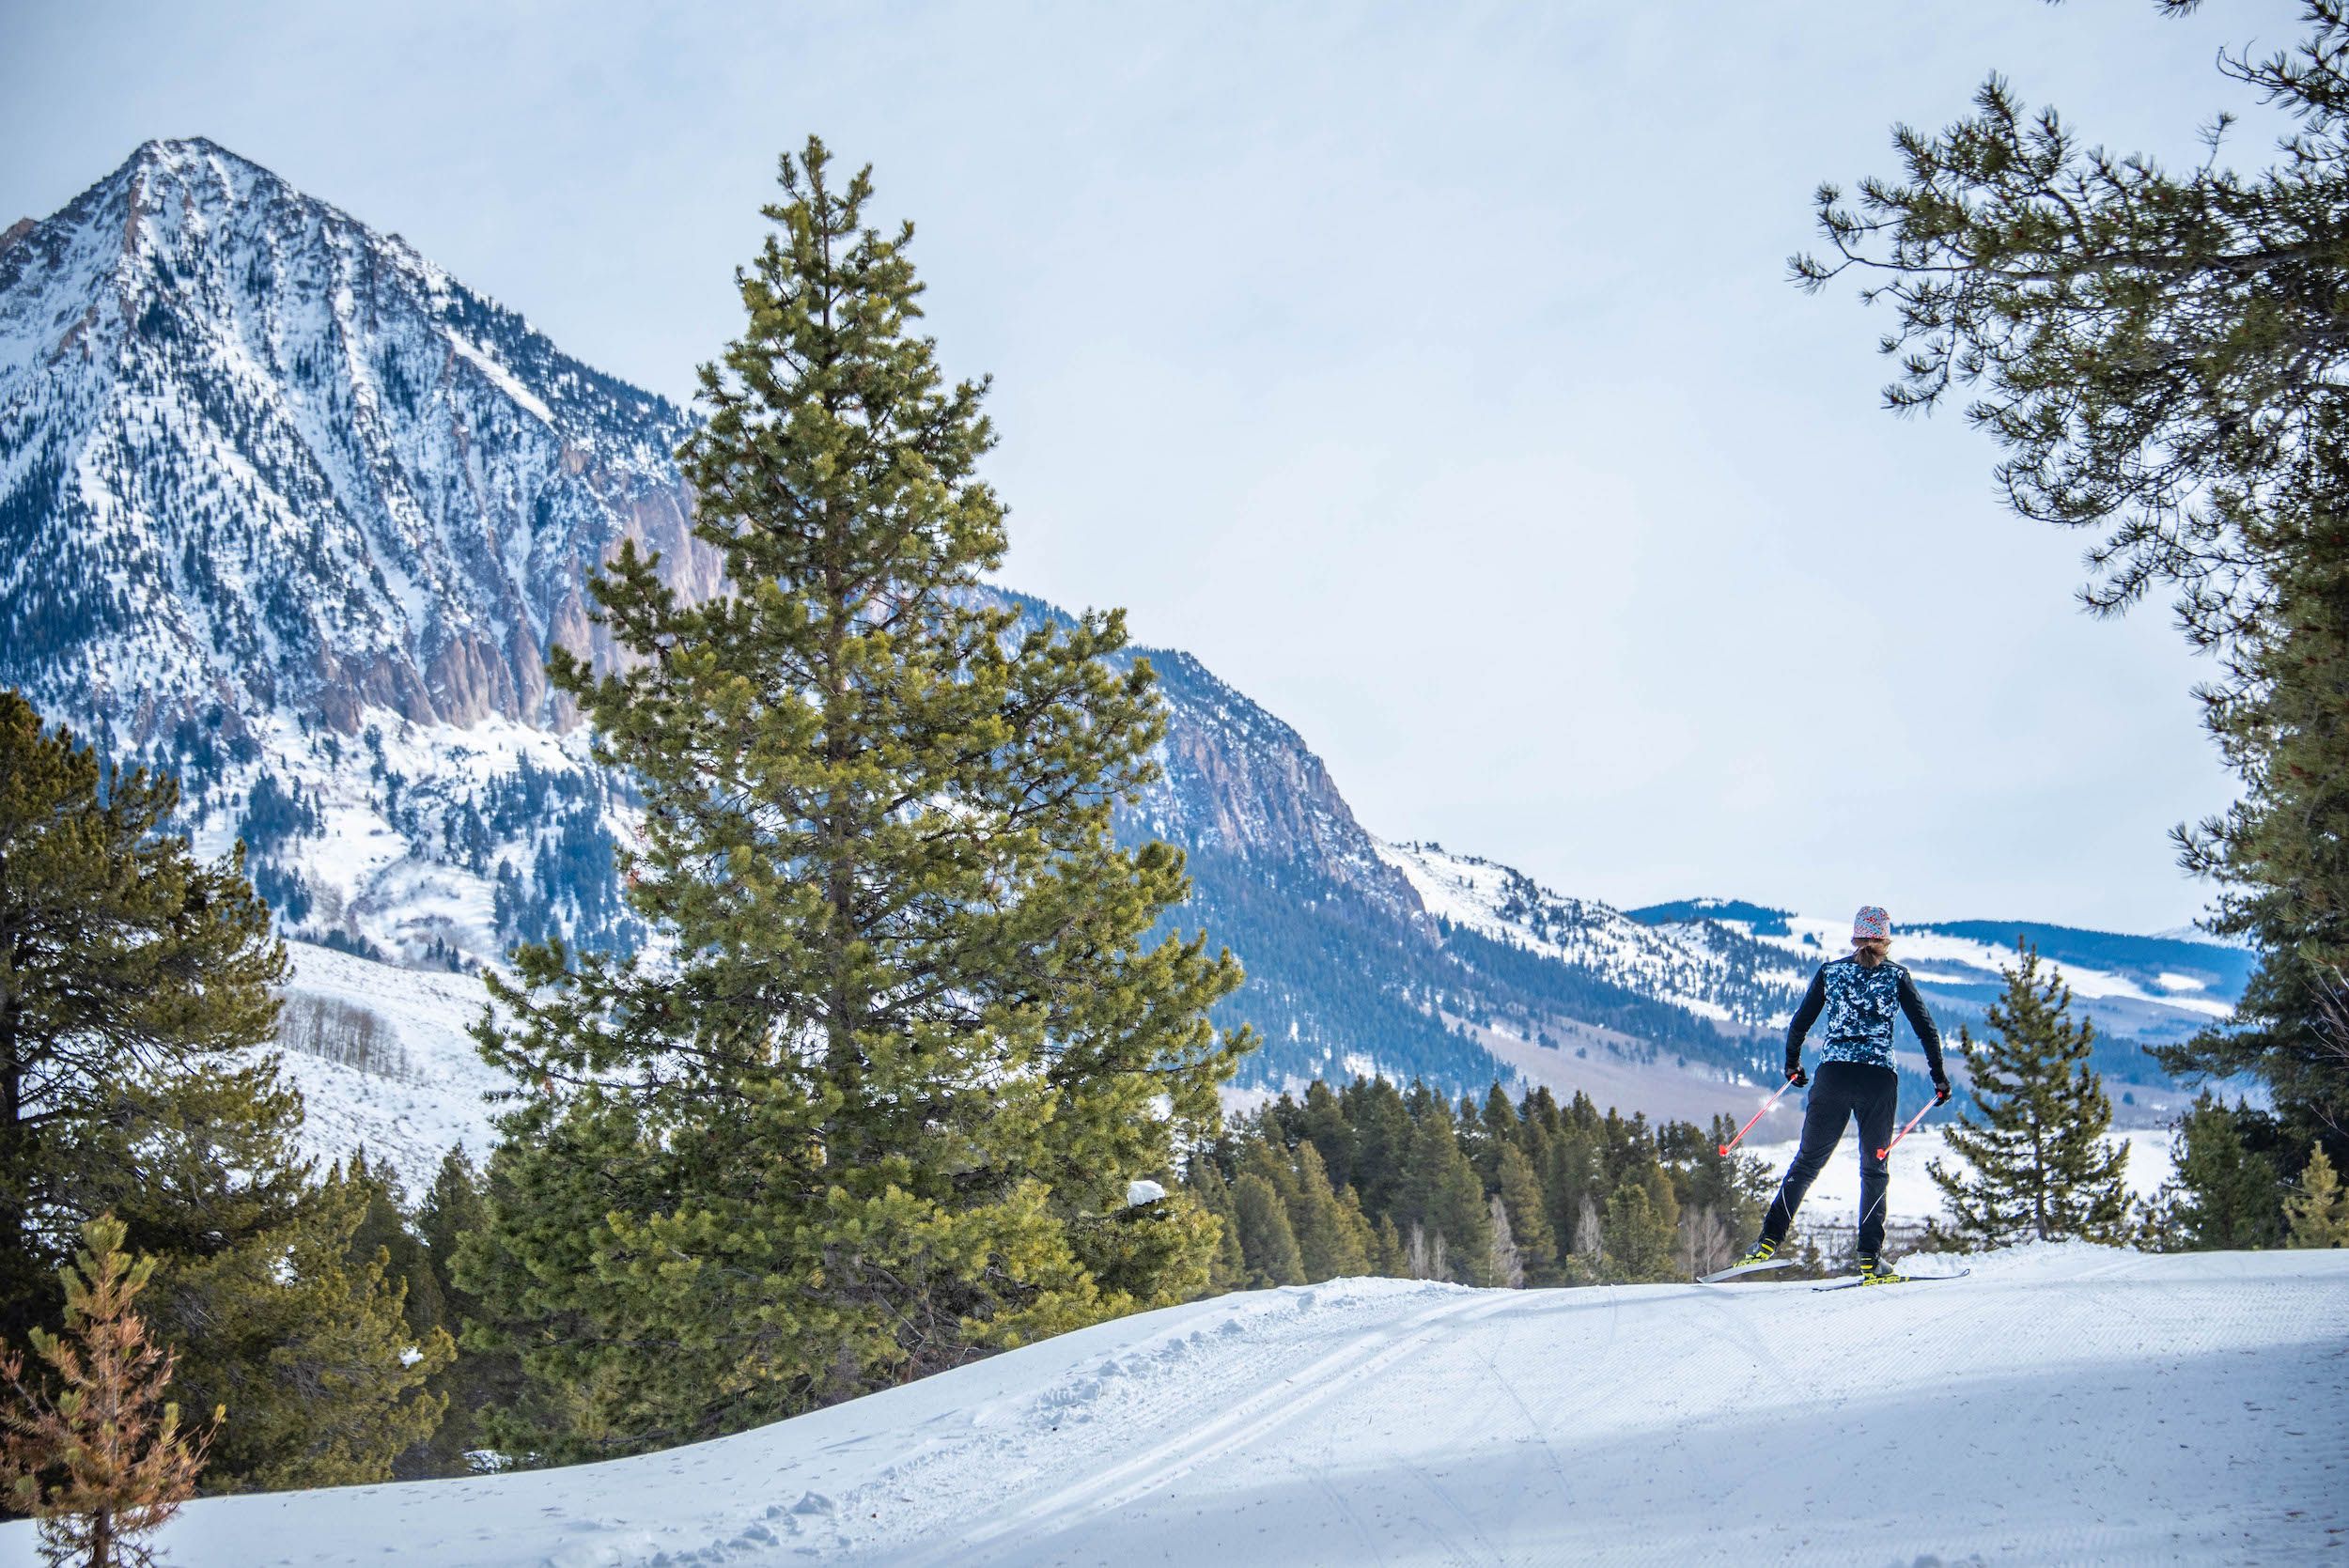 A nordic skier on a trail lined with pine trees and a mountain peak in the background